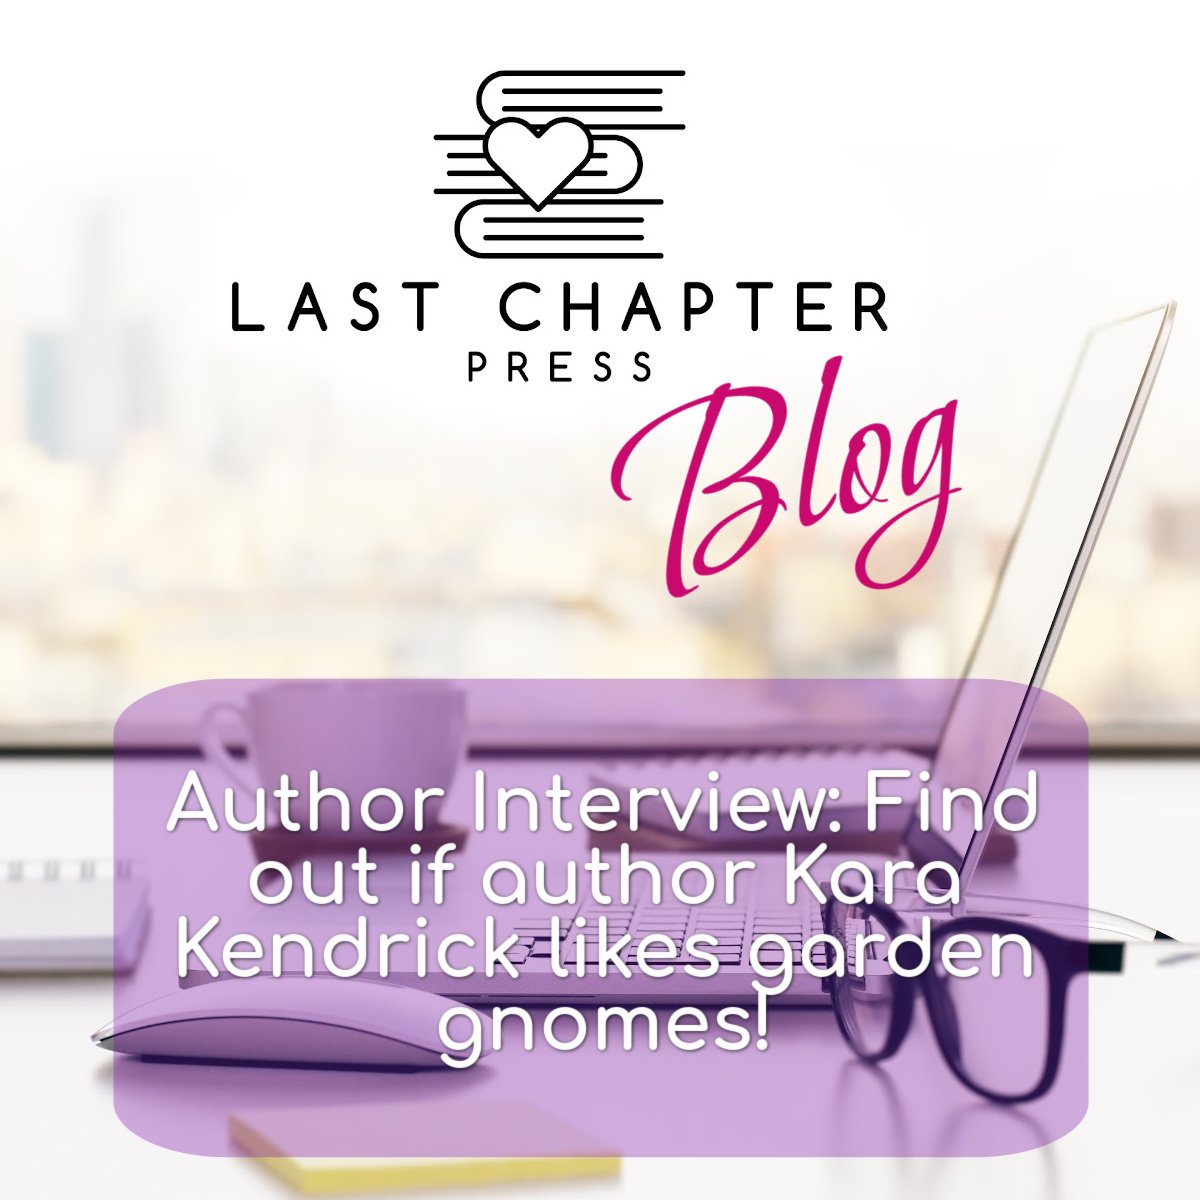 Author Interview: Find out if author Kara Kendrick likes garden gnomes!